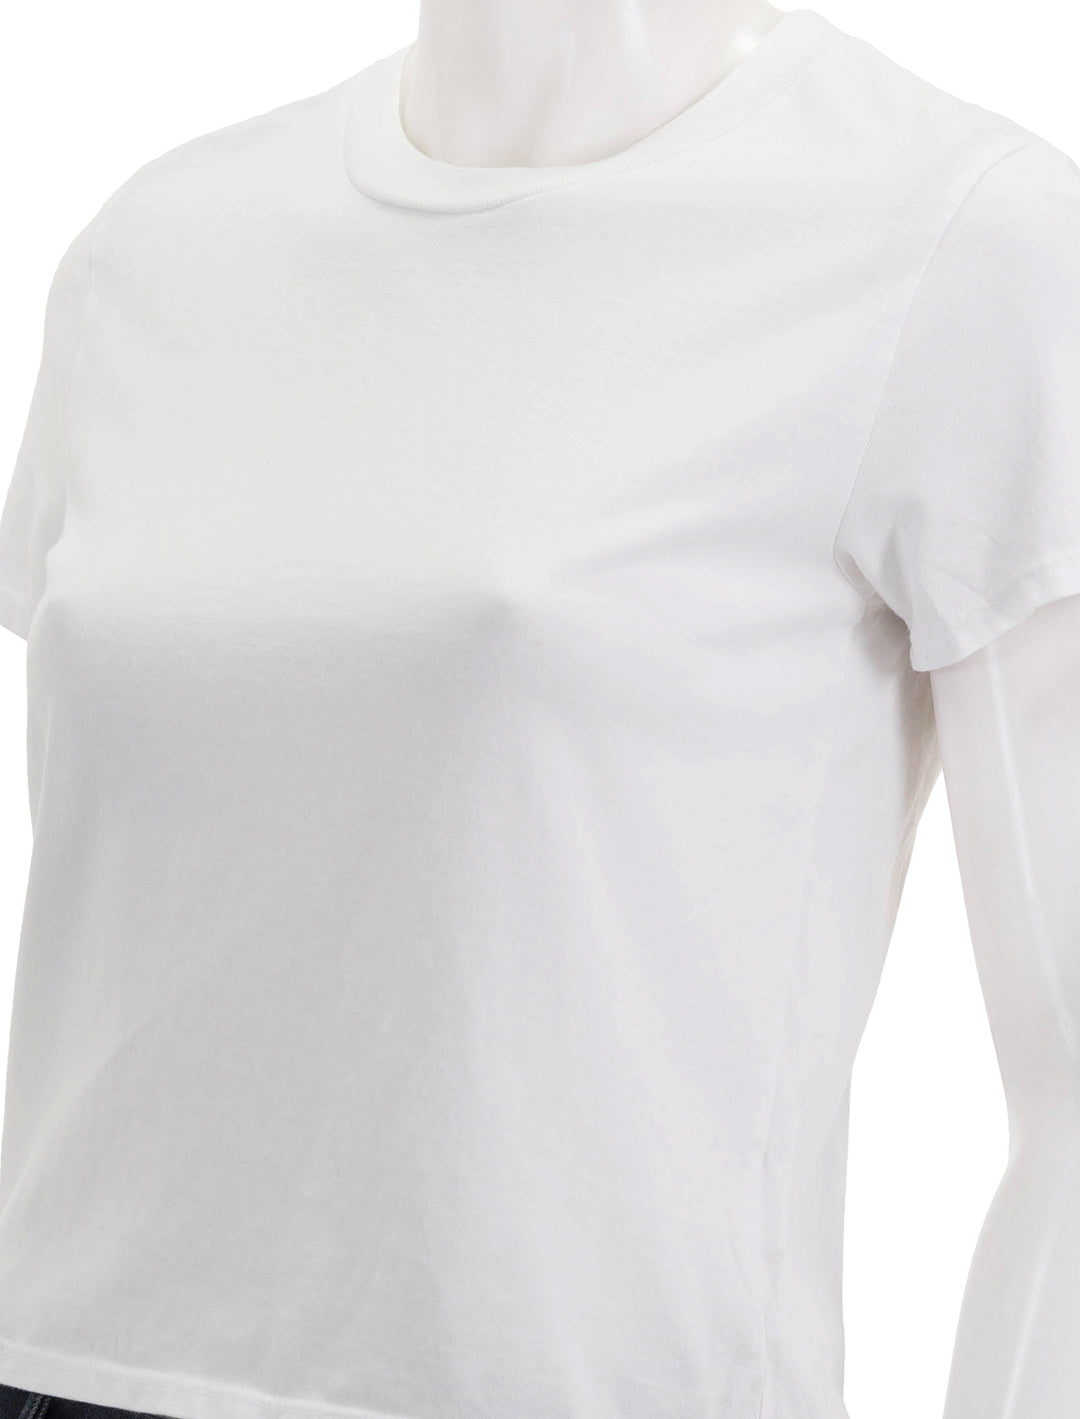 Close-up view of Perfectwhitetee's springsteen tee in white.